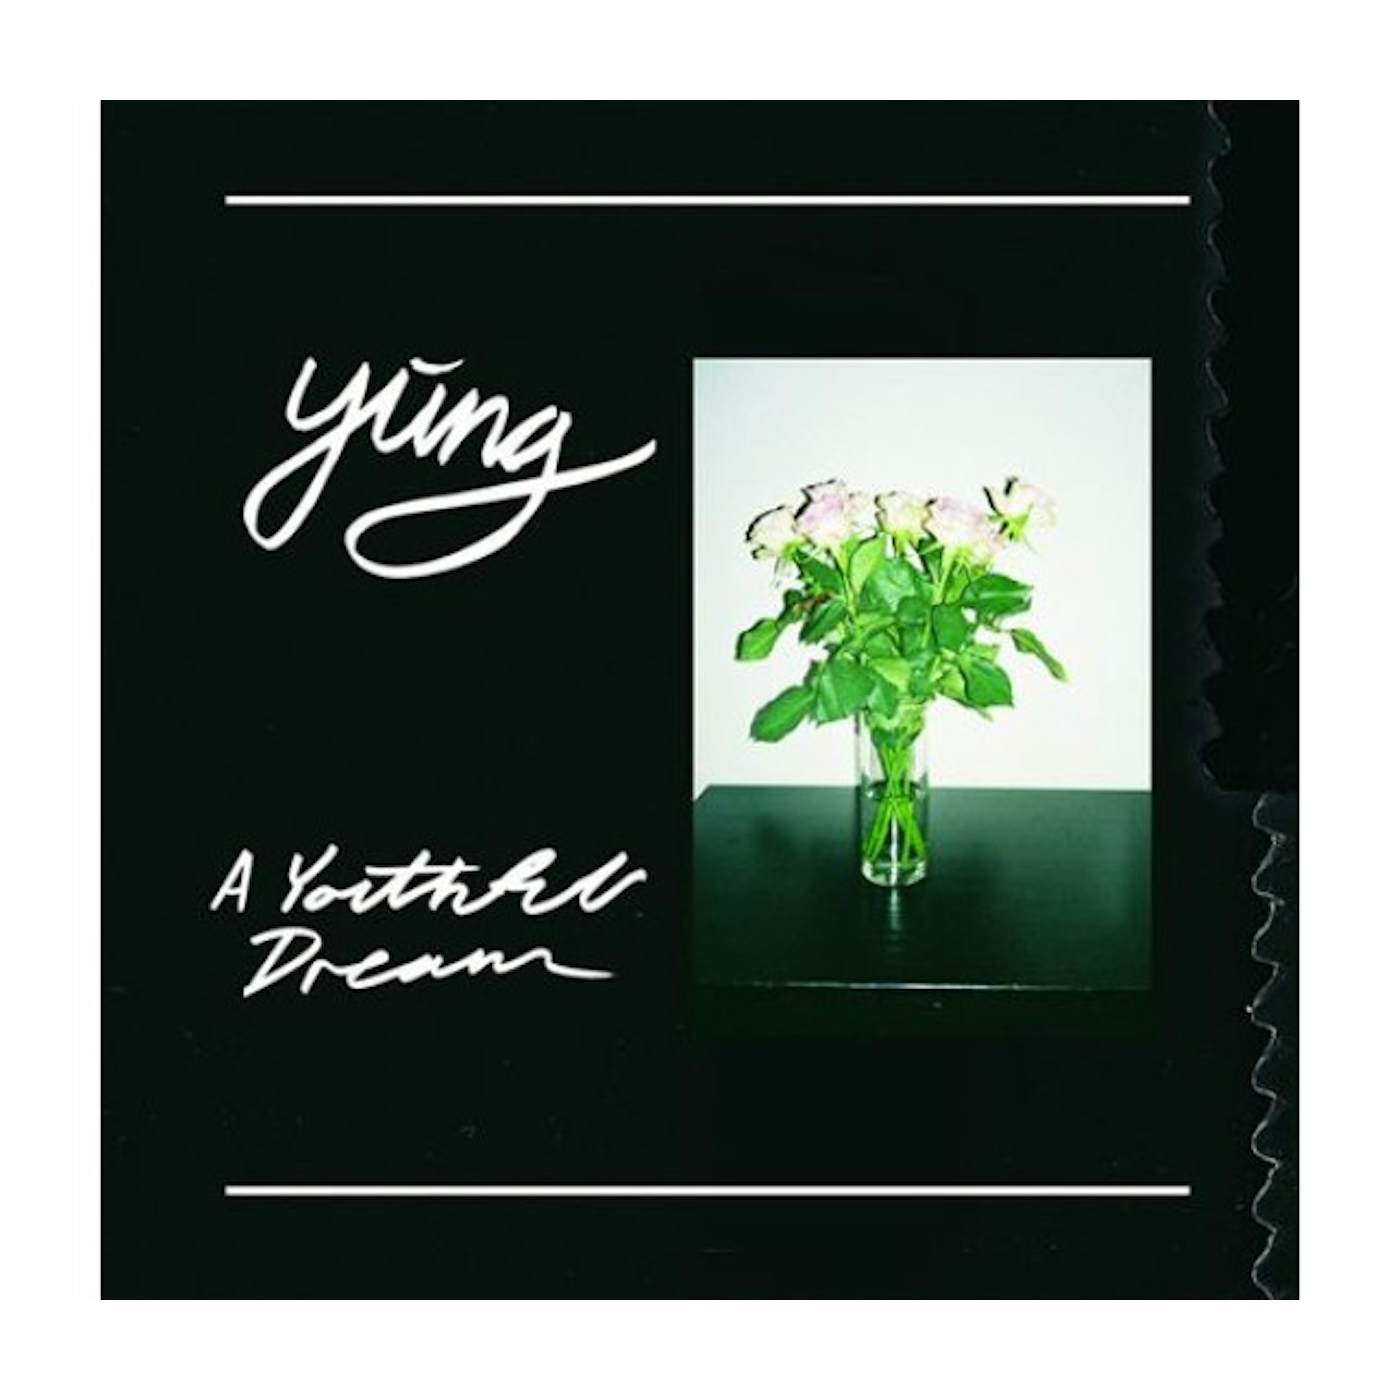 Yung YOUTHFUL DREAM Vinyl Record